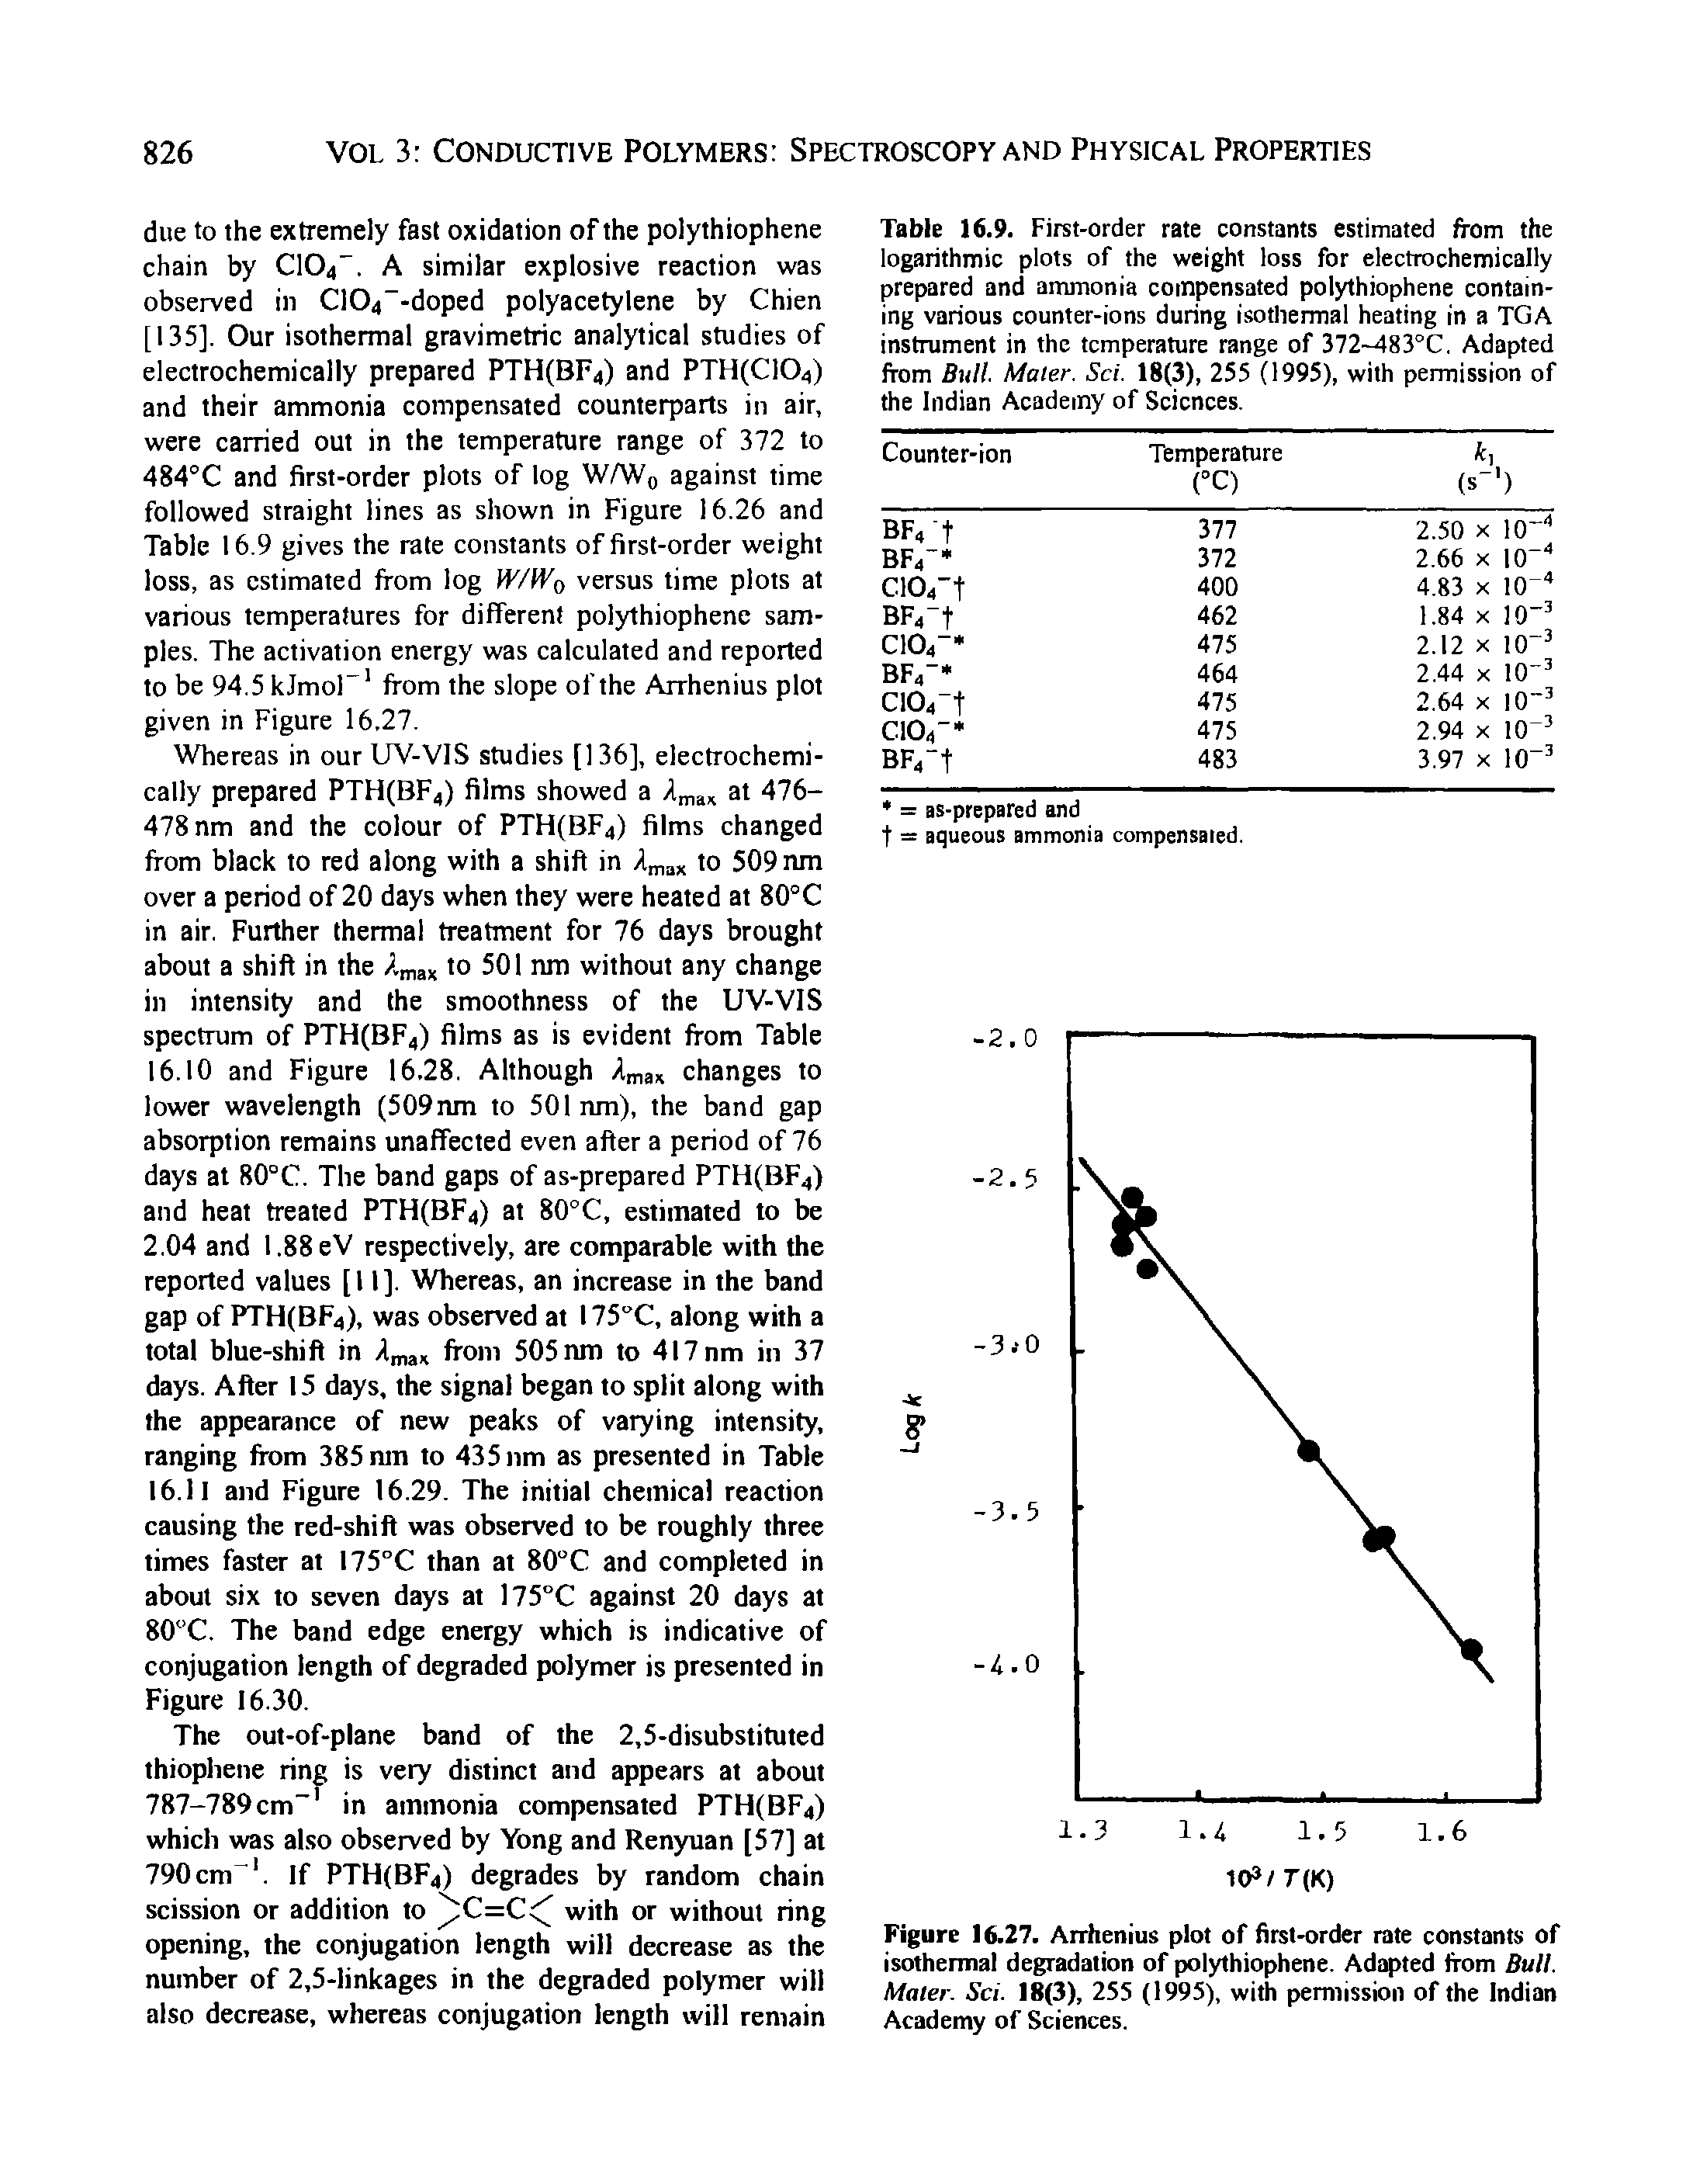 Figure 16.27. Arrhenius plot of first-order rate constants of isothermal degradation of polythiophene. Adapted from Bull. Mater. Sci. 18(3), 255 (1995), with pemiission of the Indian Academy of Sciences.